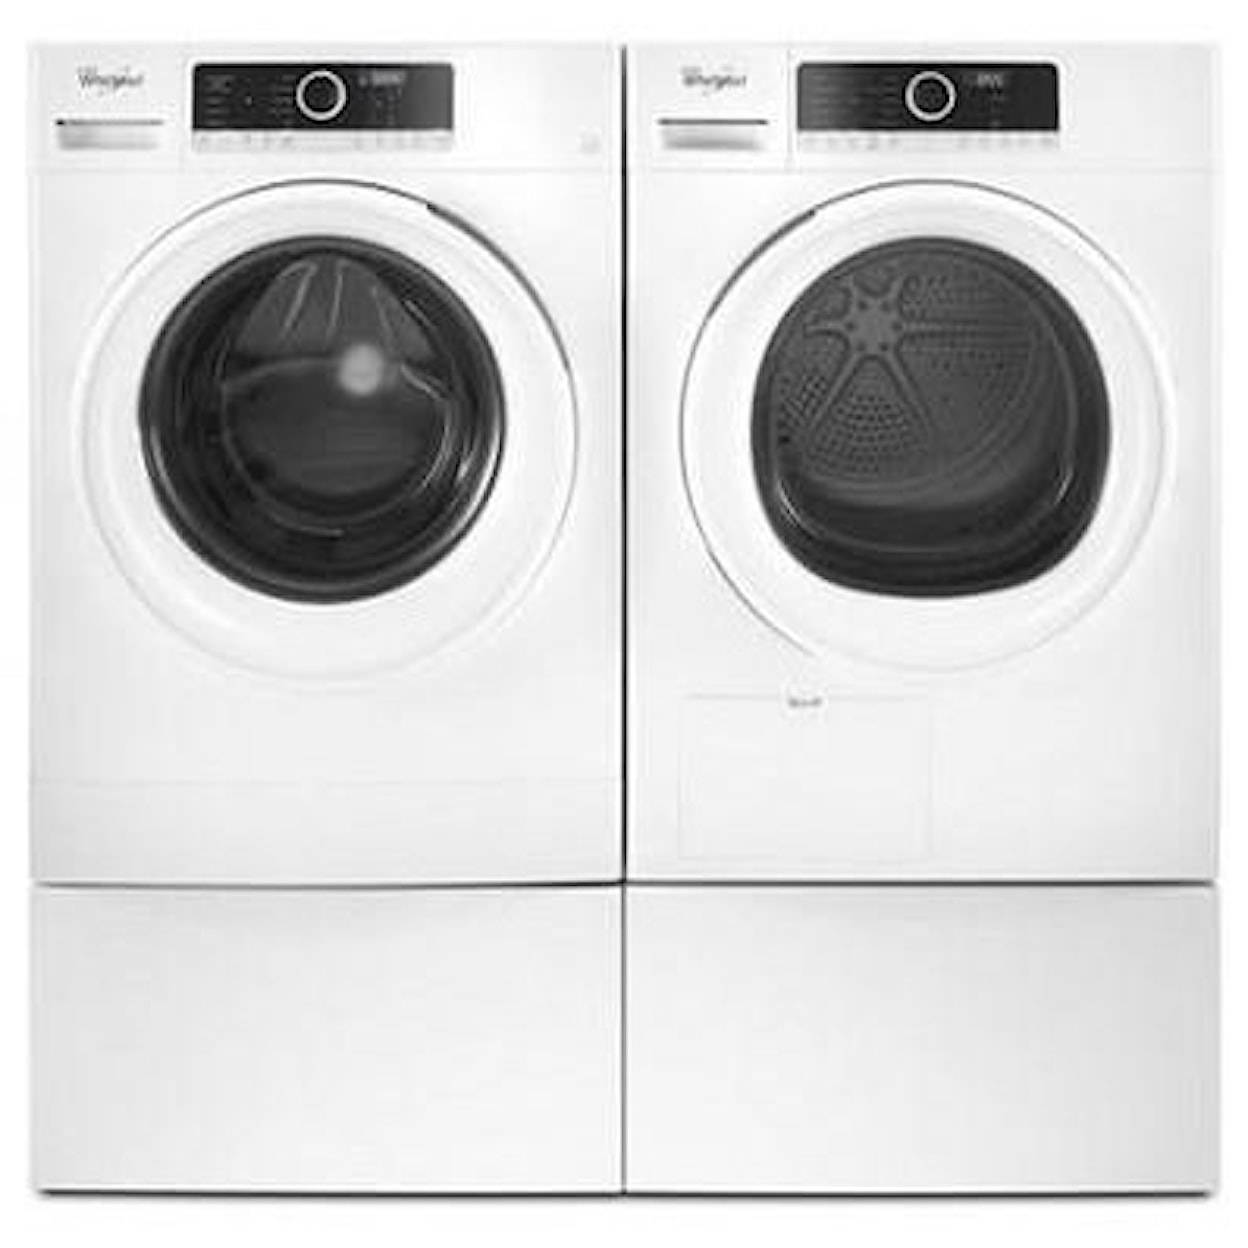 Whirlpool Washers 1.9 Cu. Ft. 24" Compact Washer